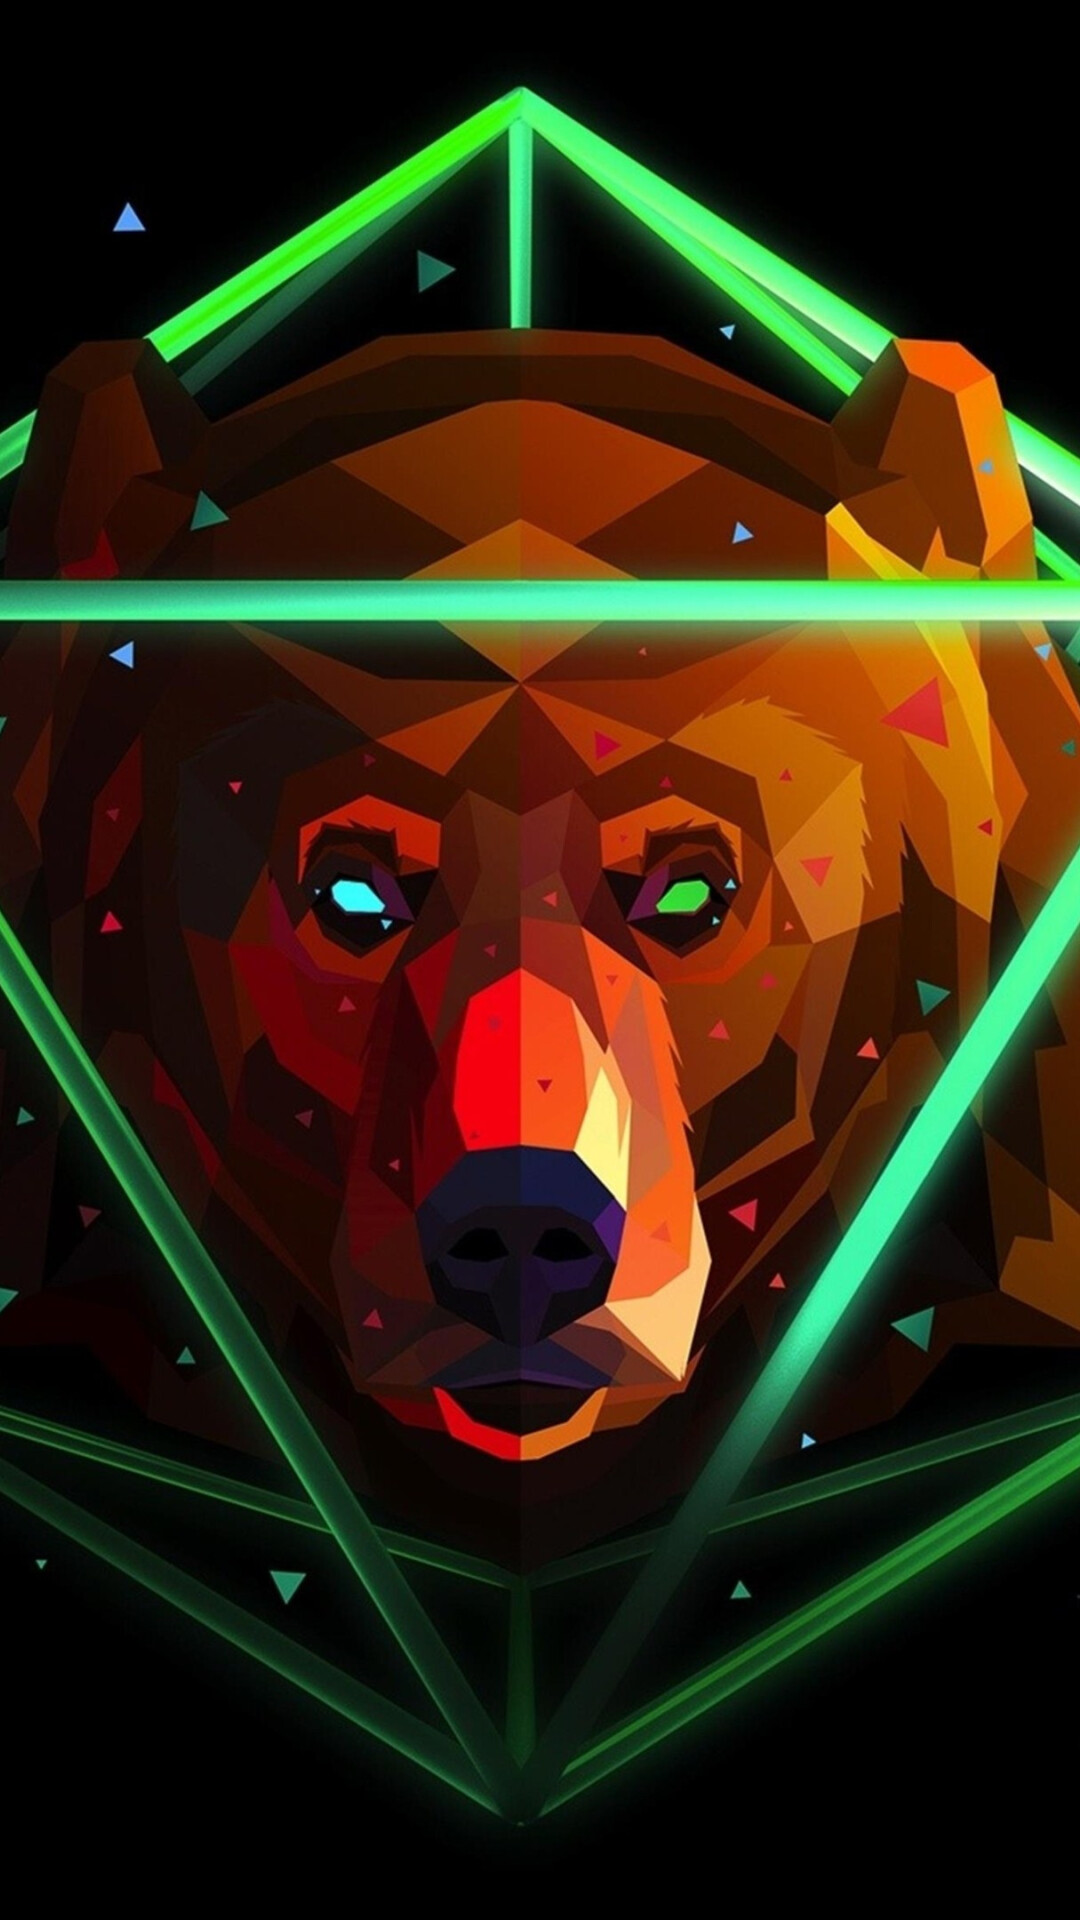 Geometric Animal: Art with straight lines and mathematical features and relationships, Bear. 1080x1920 Full HD Background.